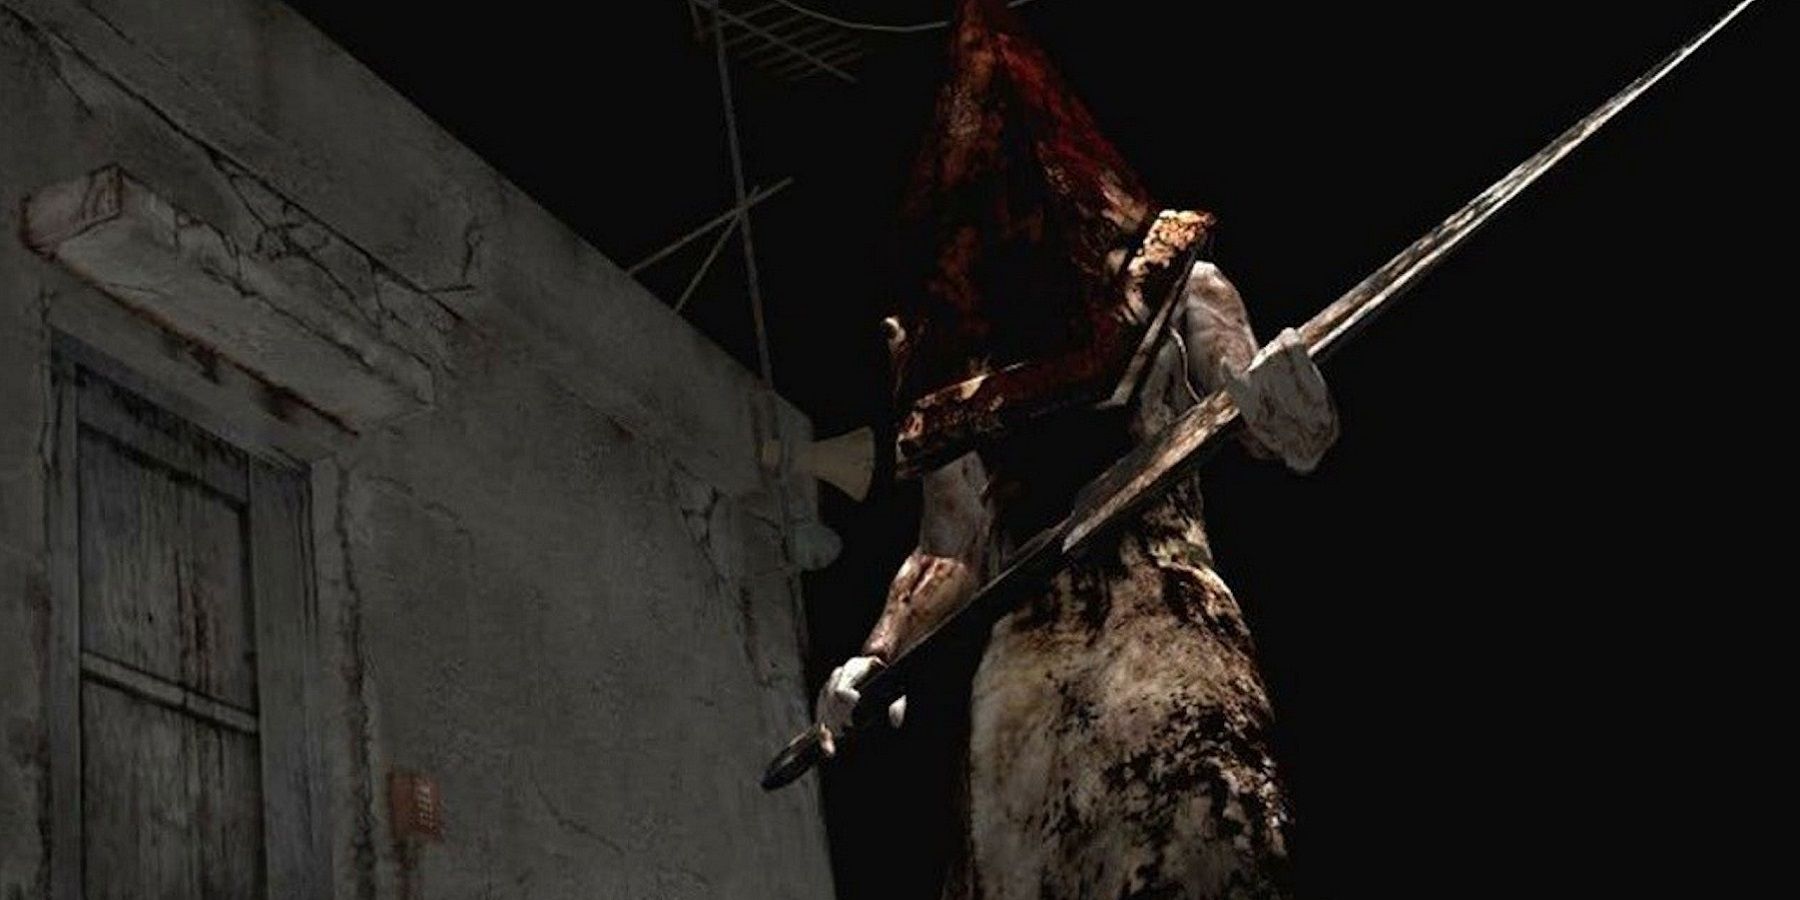 Image from Silent Hill 2 showing Pyramid Head holding their mighty sword.